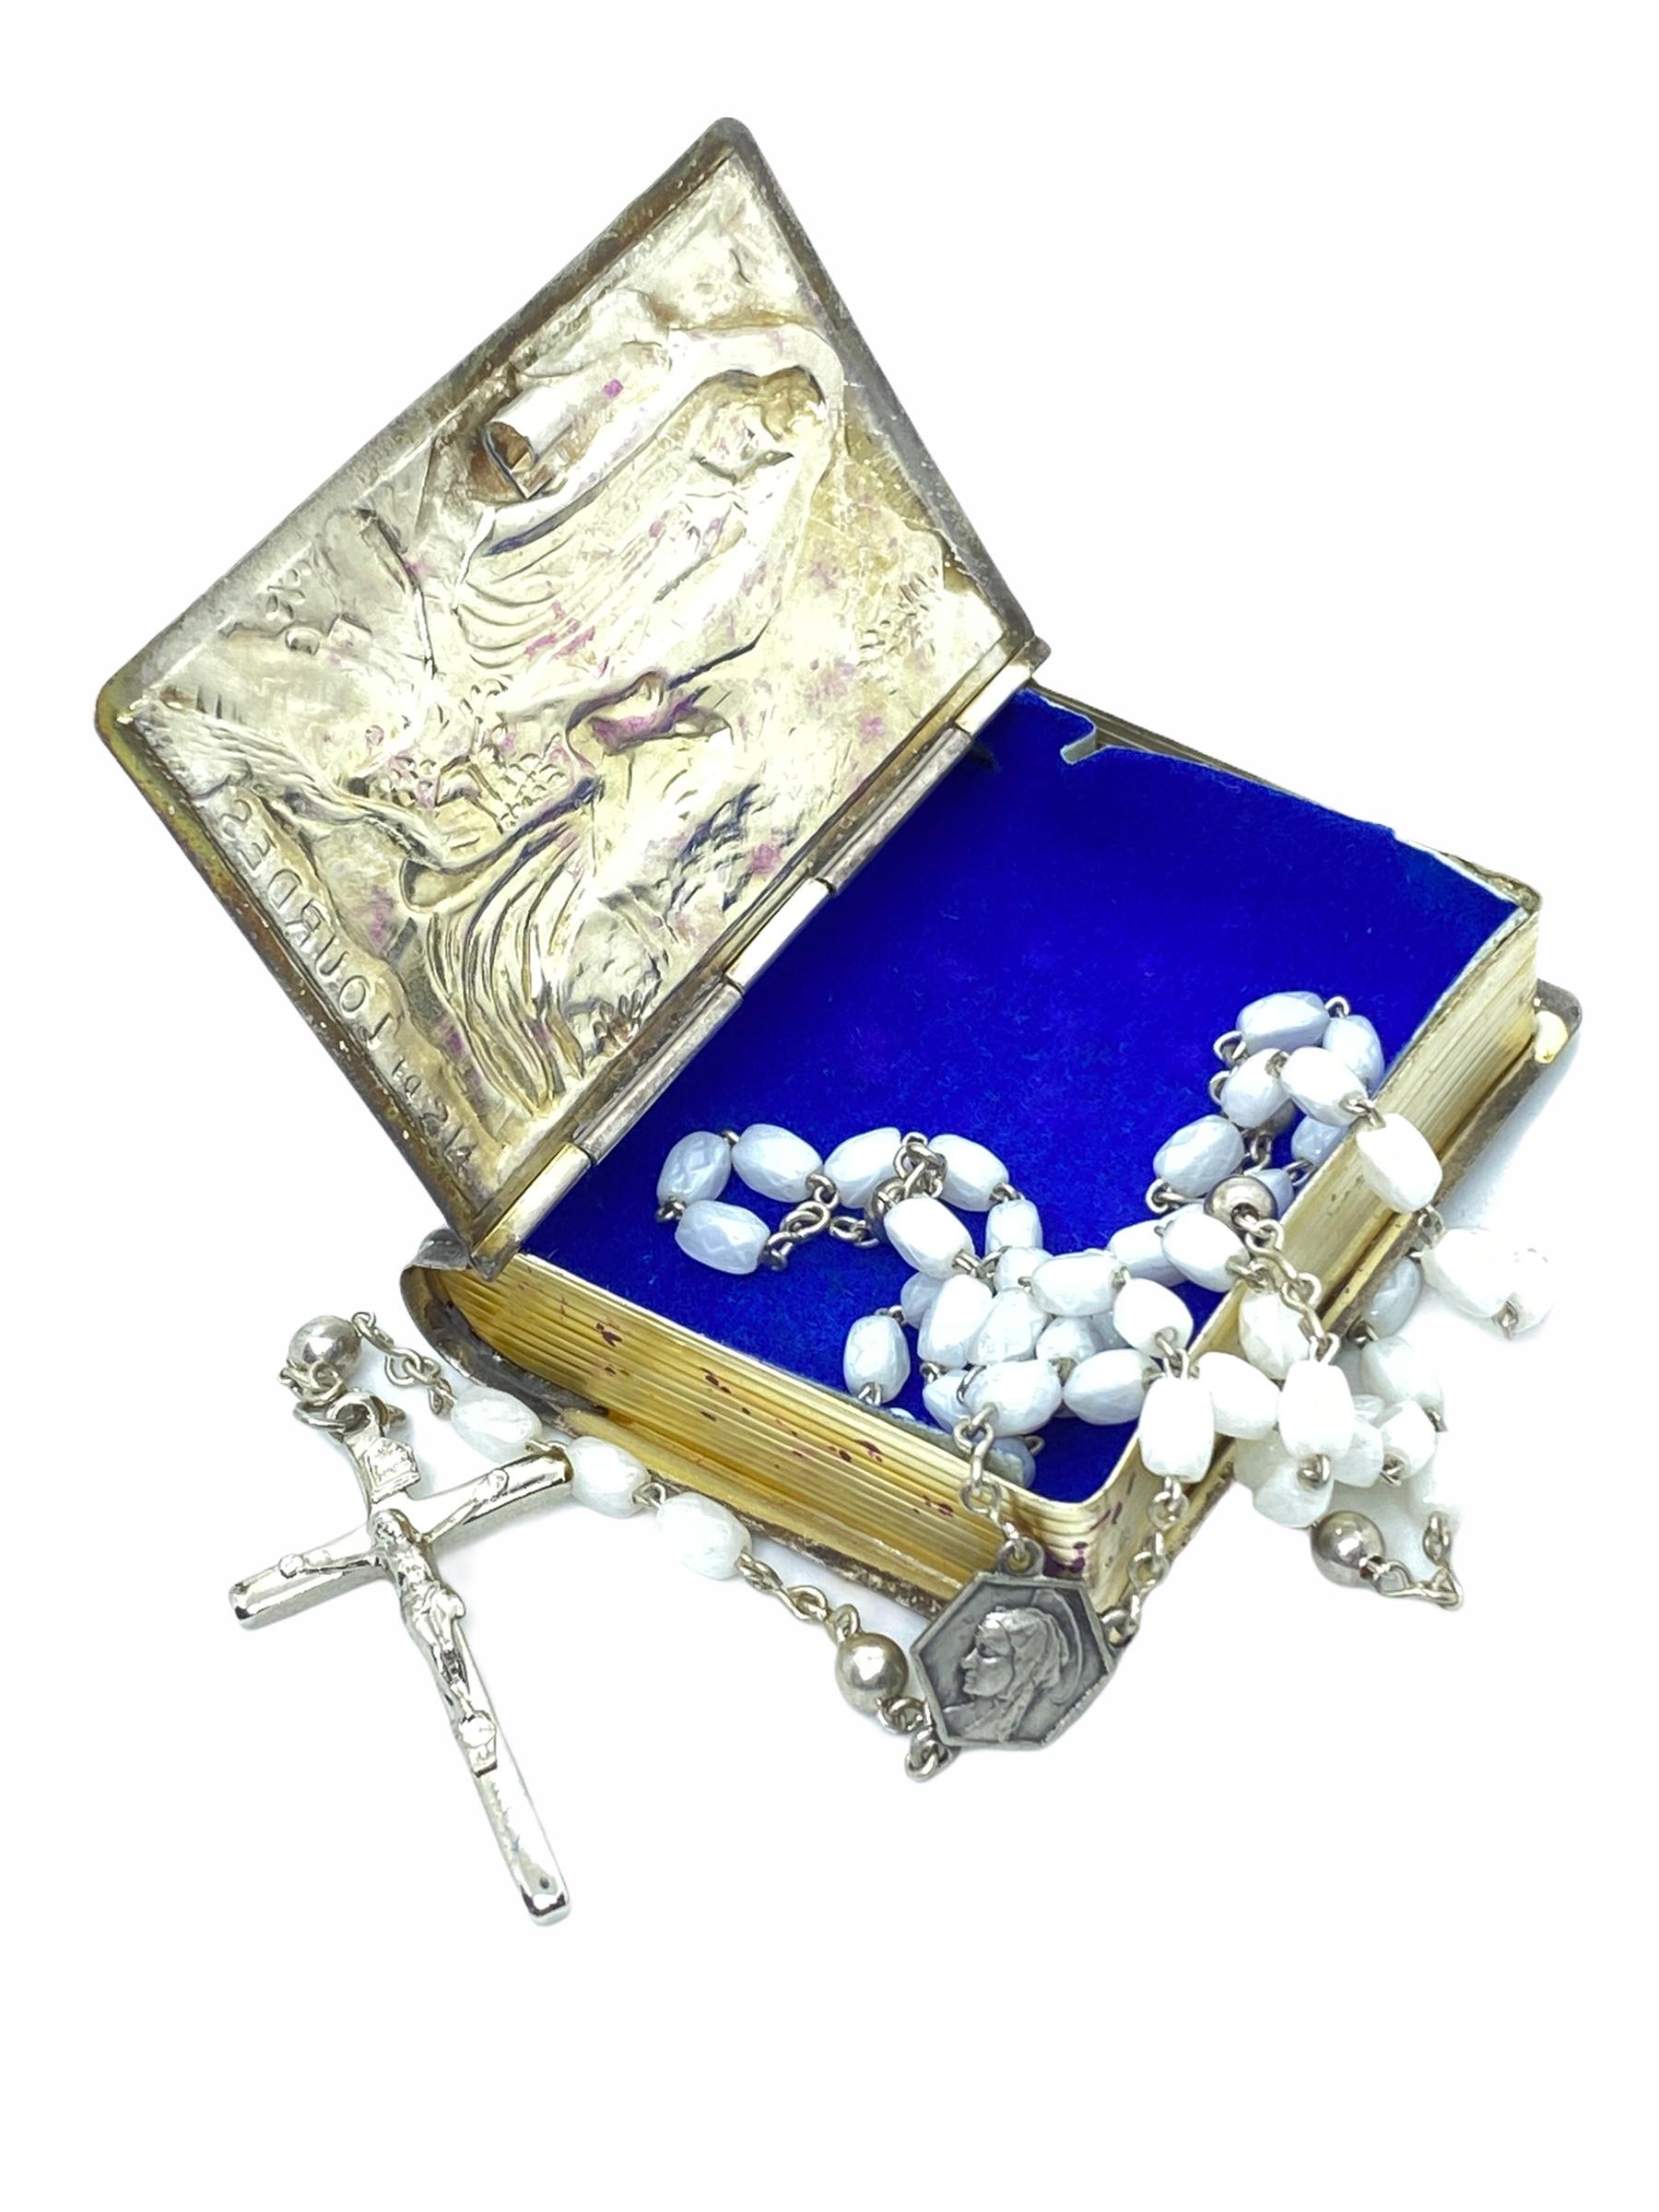 This vintage silver tin box was a souvenir from a pilgrims journey to the famous City of Lourdes in France. It is made of silver Tin and contains a Rosary. The Rosary is approx. 15 inches in length, that making it easily worn.

   